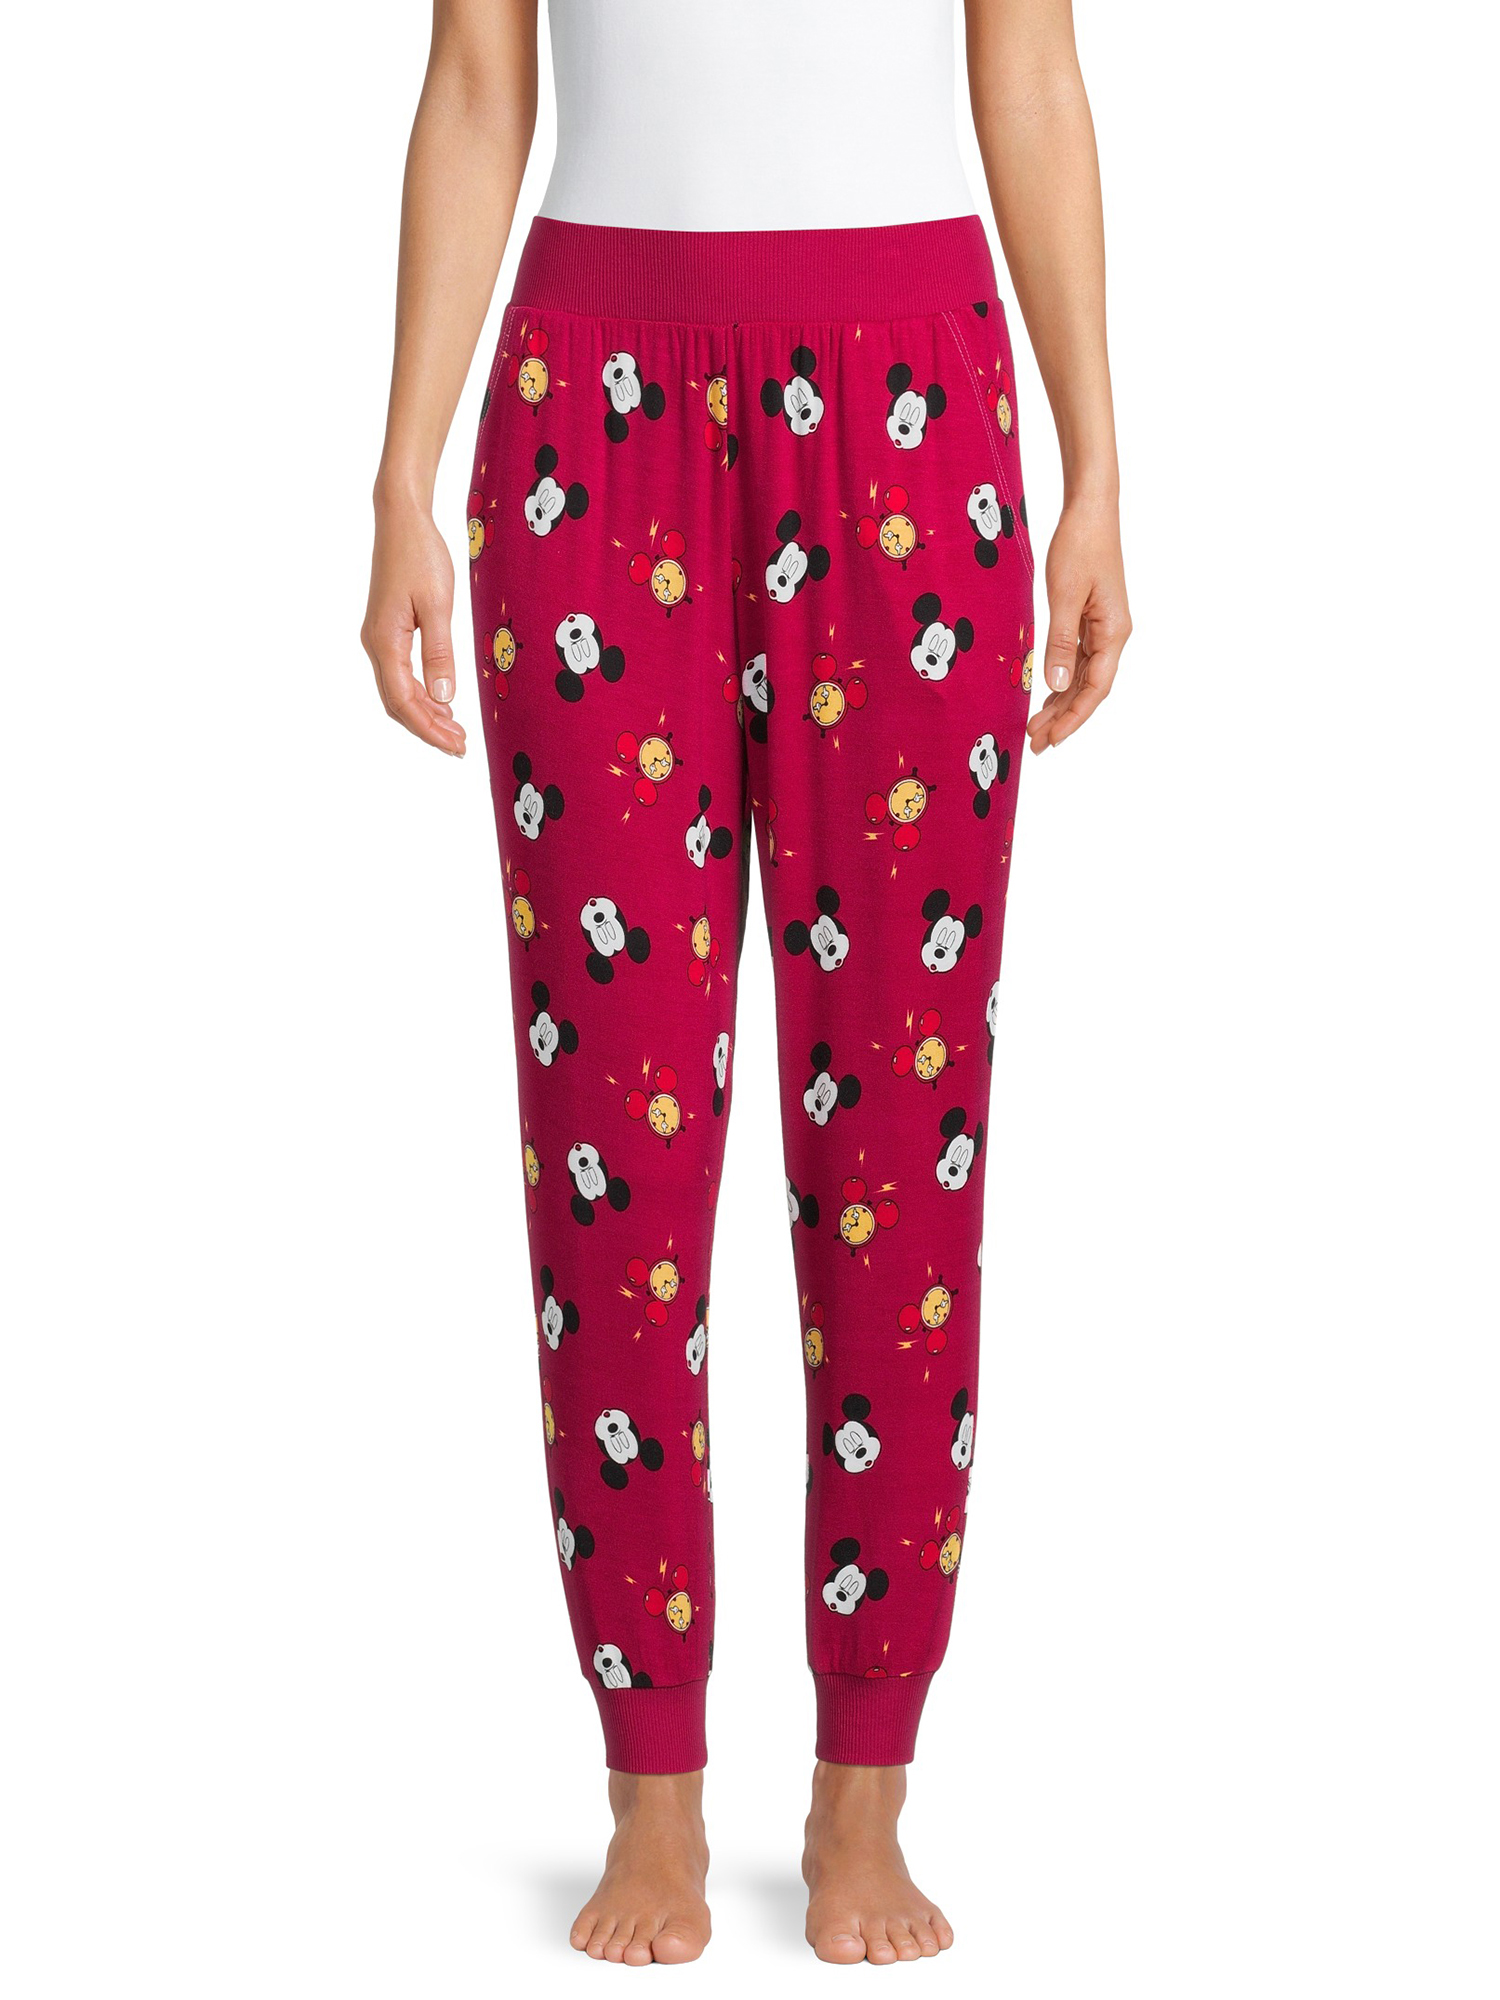 Disney Printed Breathable Easy Care Pajamas (Women's) 1 Pack - image 1 of 7